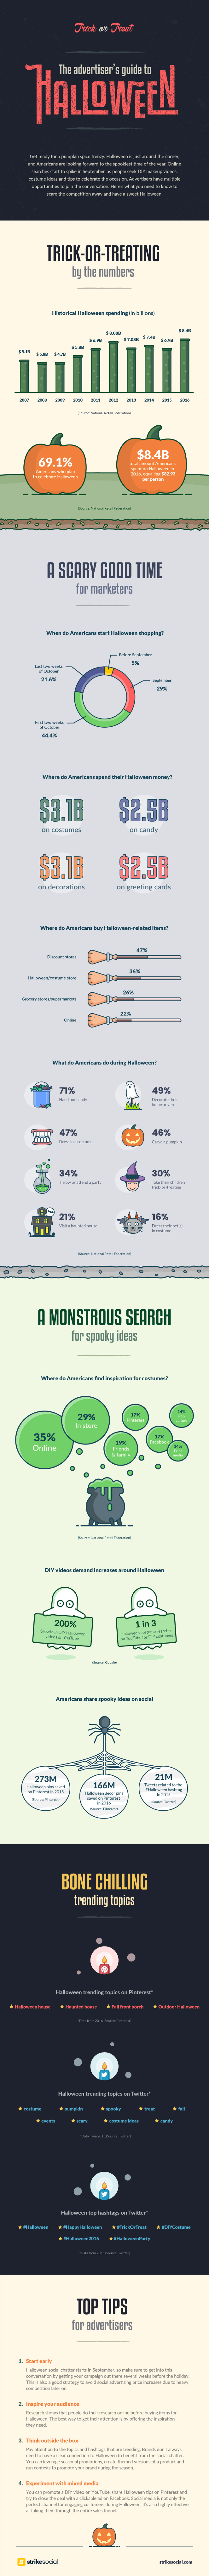 Infographic - Digital Advertiser's Guide to Halloween